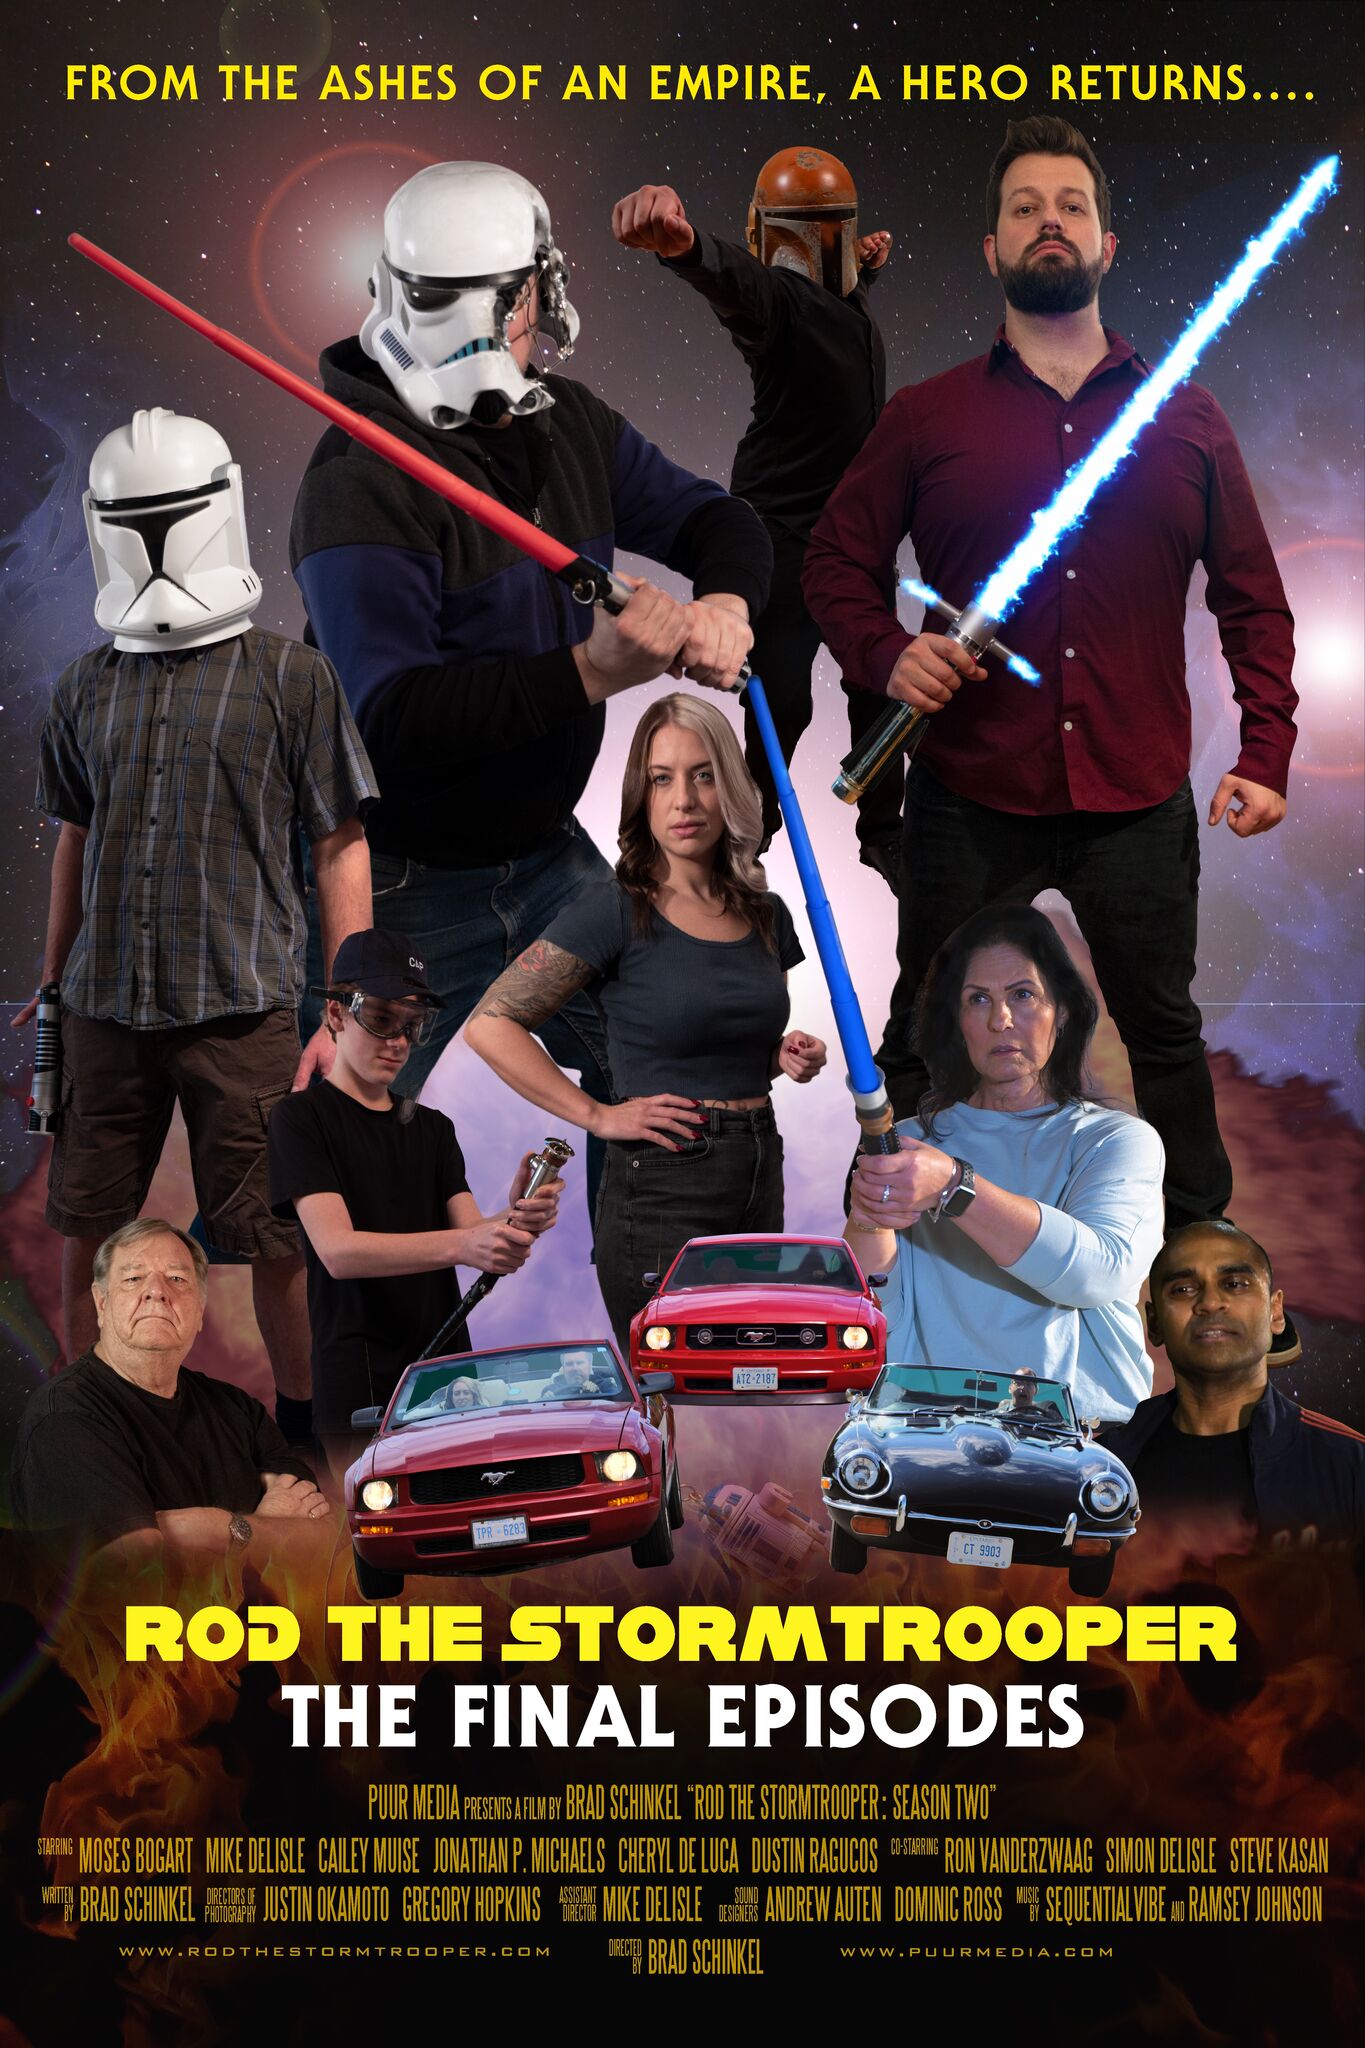 Rod the Stormtrooper